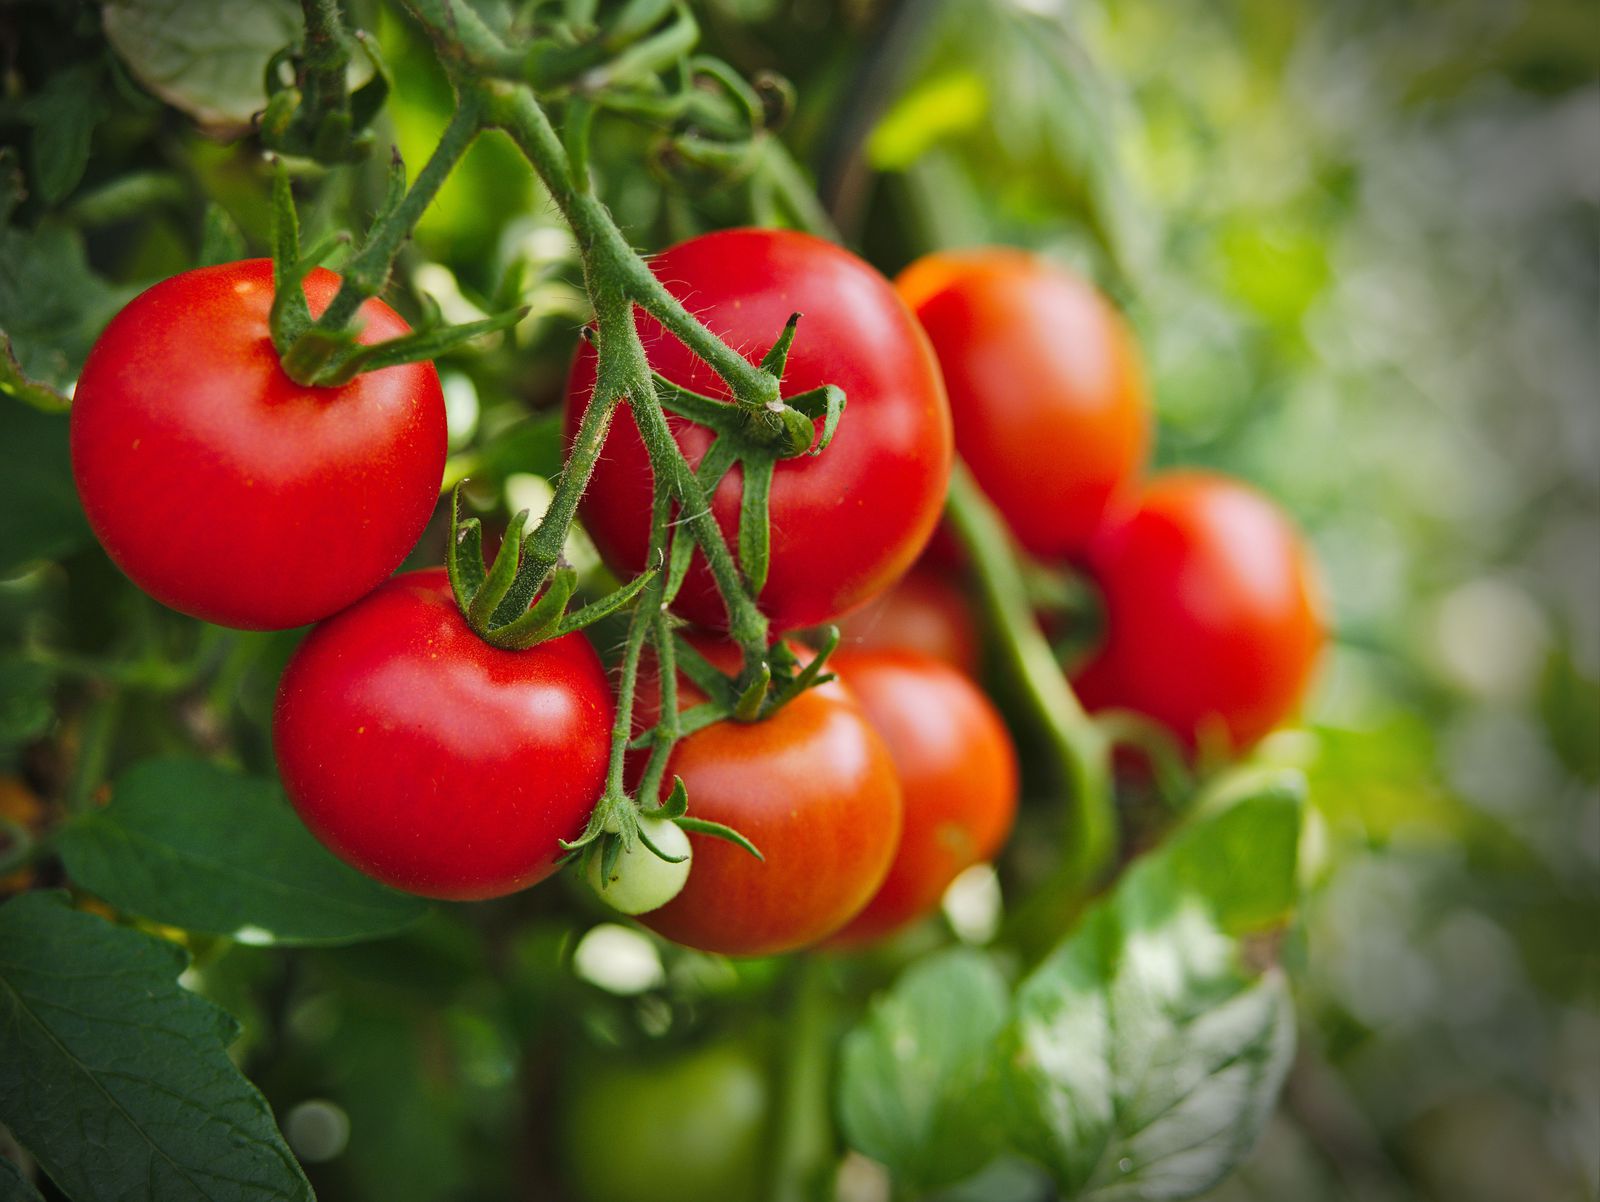 Tomatoes Can Warn of Other Plants